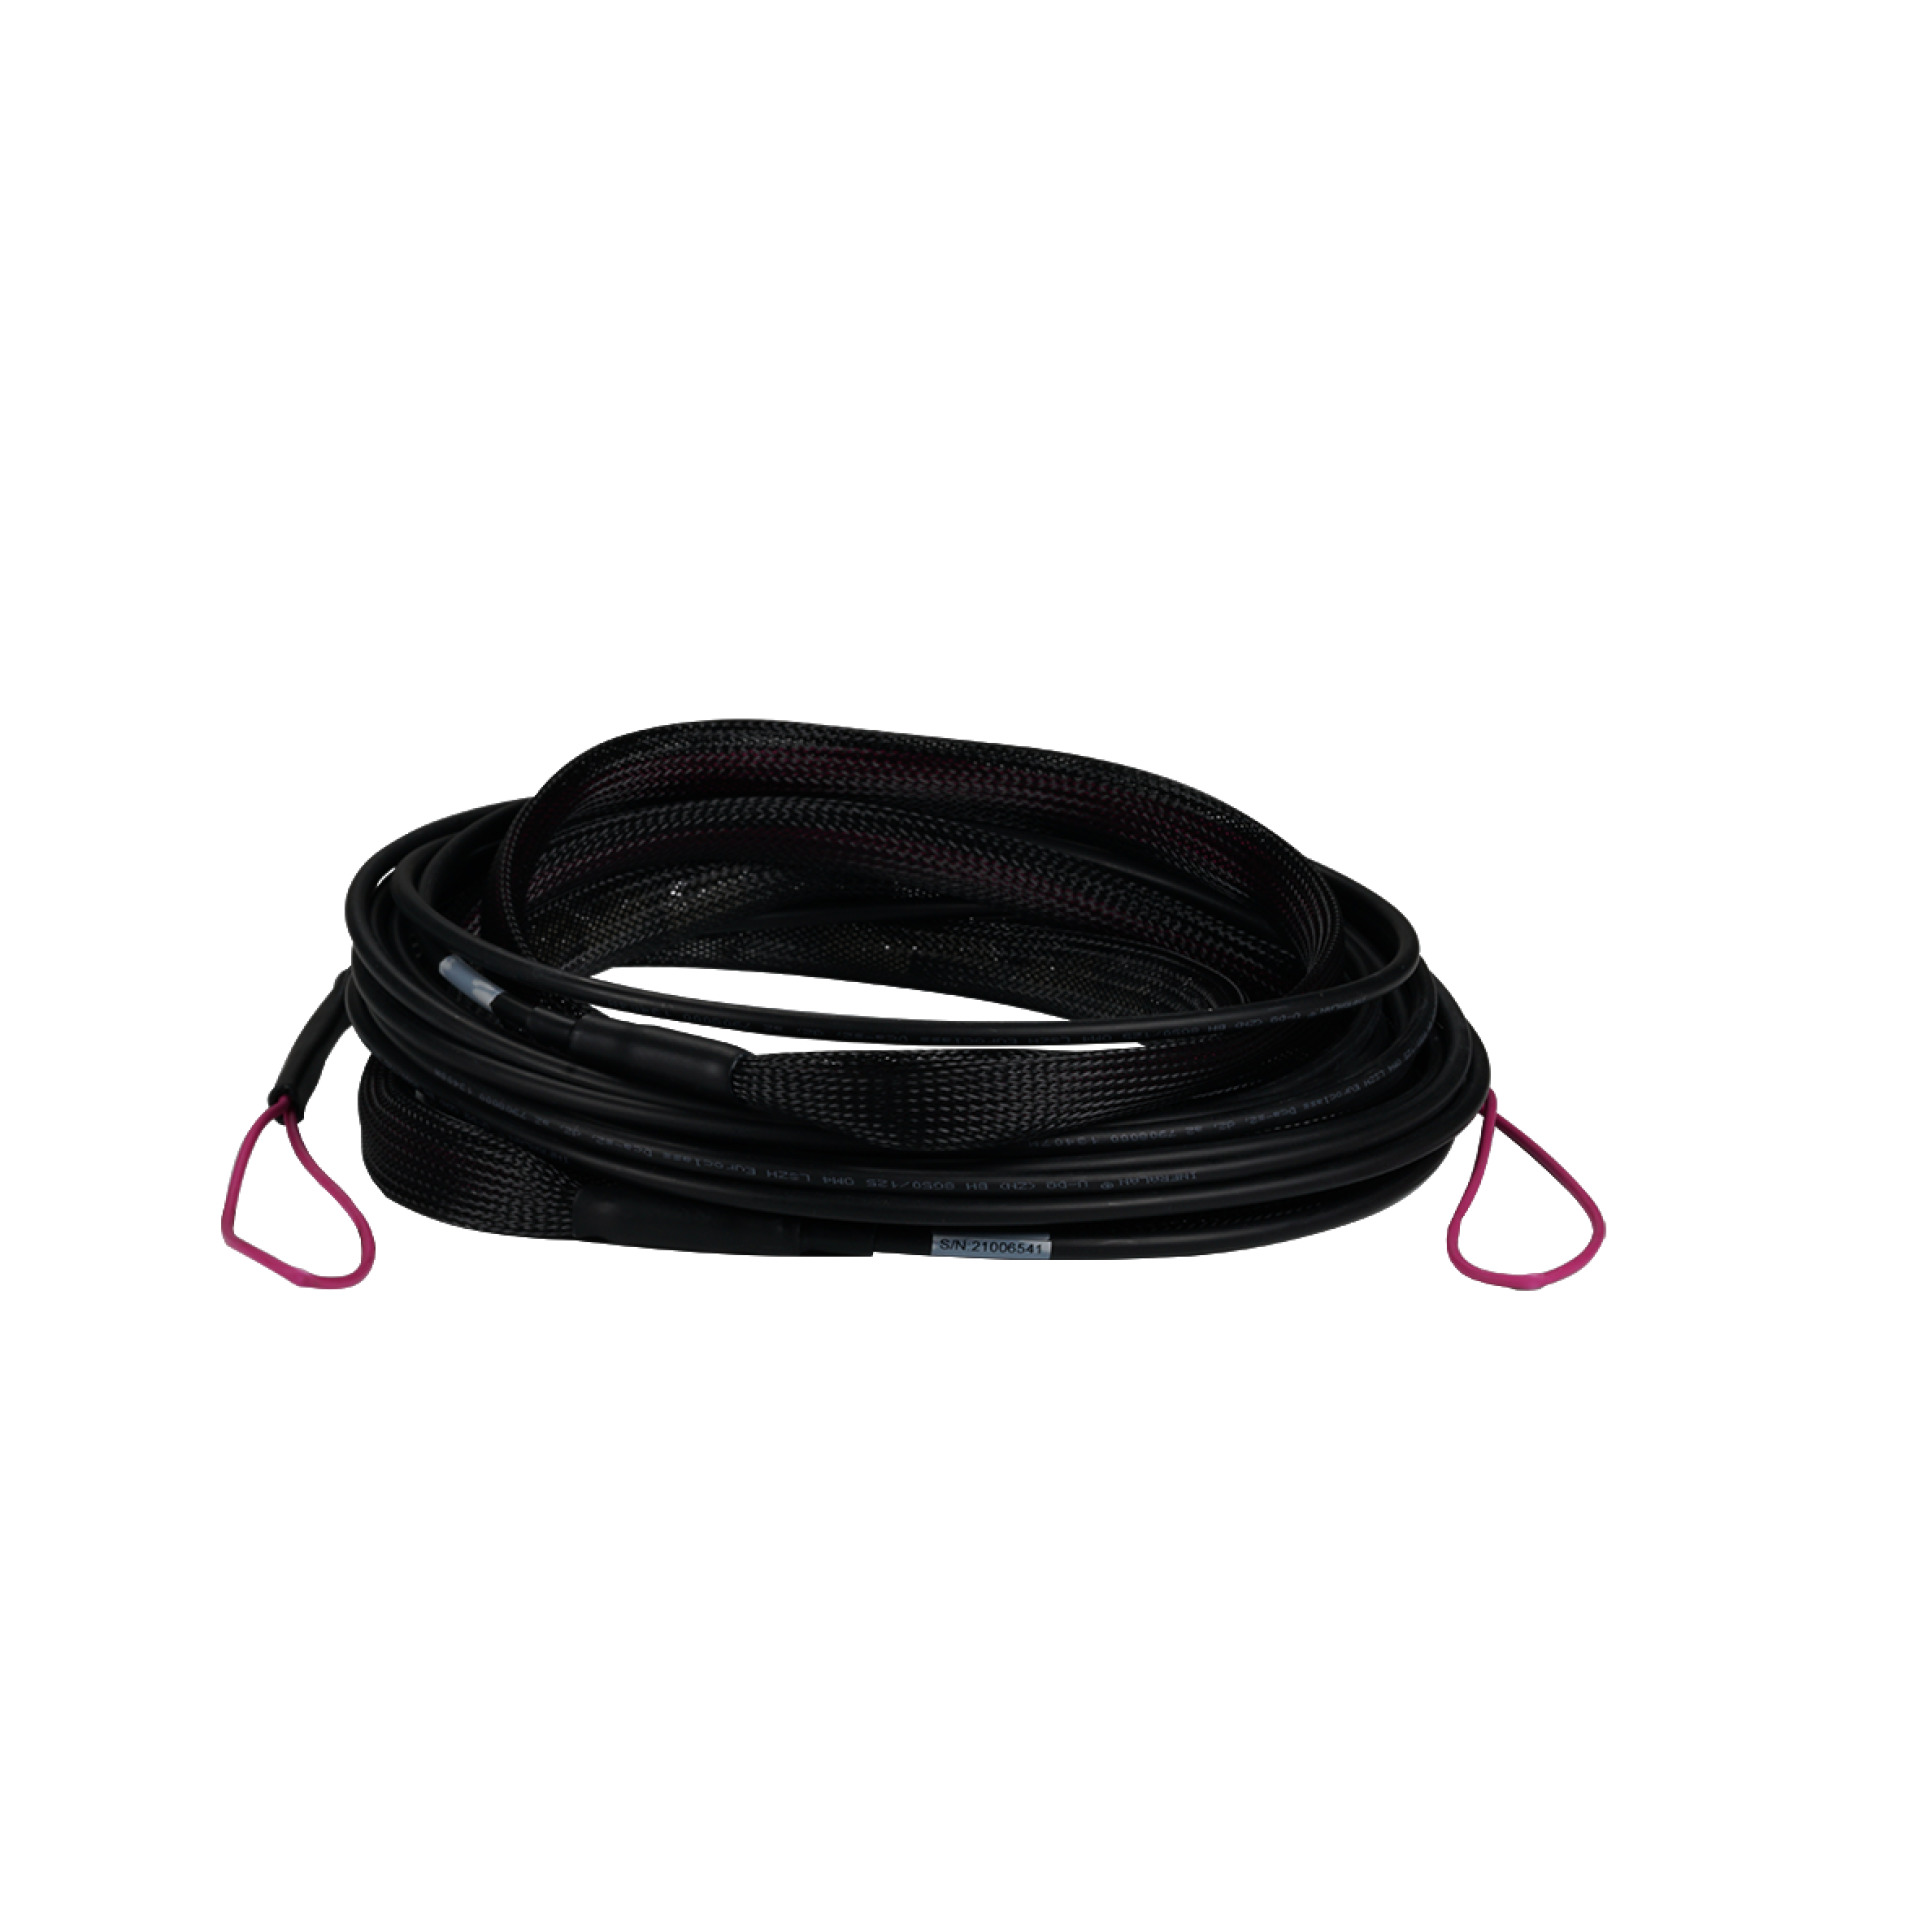 Trunk cable U-DQ(ZN)BH 4G 50/125, SC/SC OM4 40m